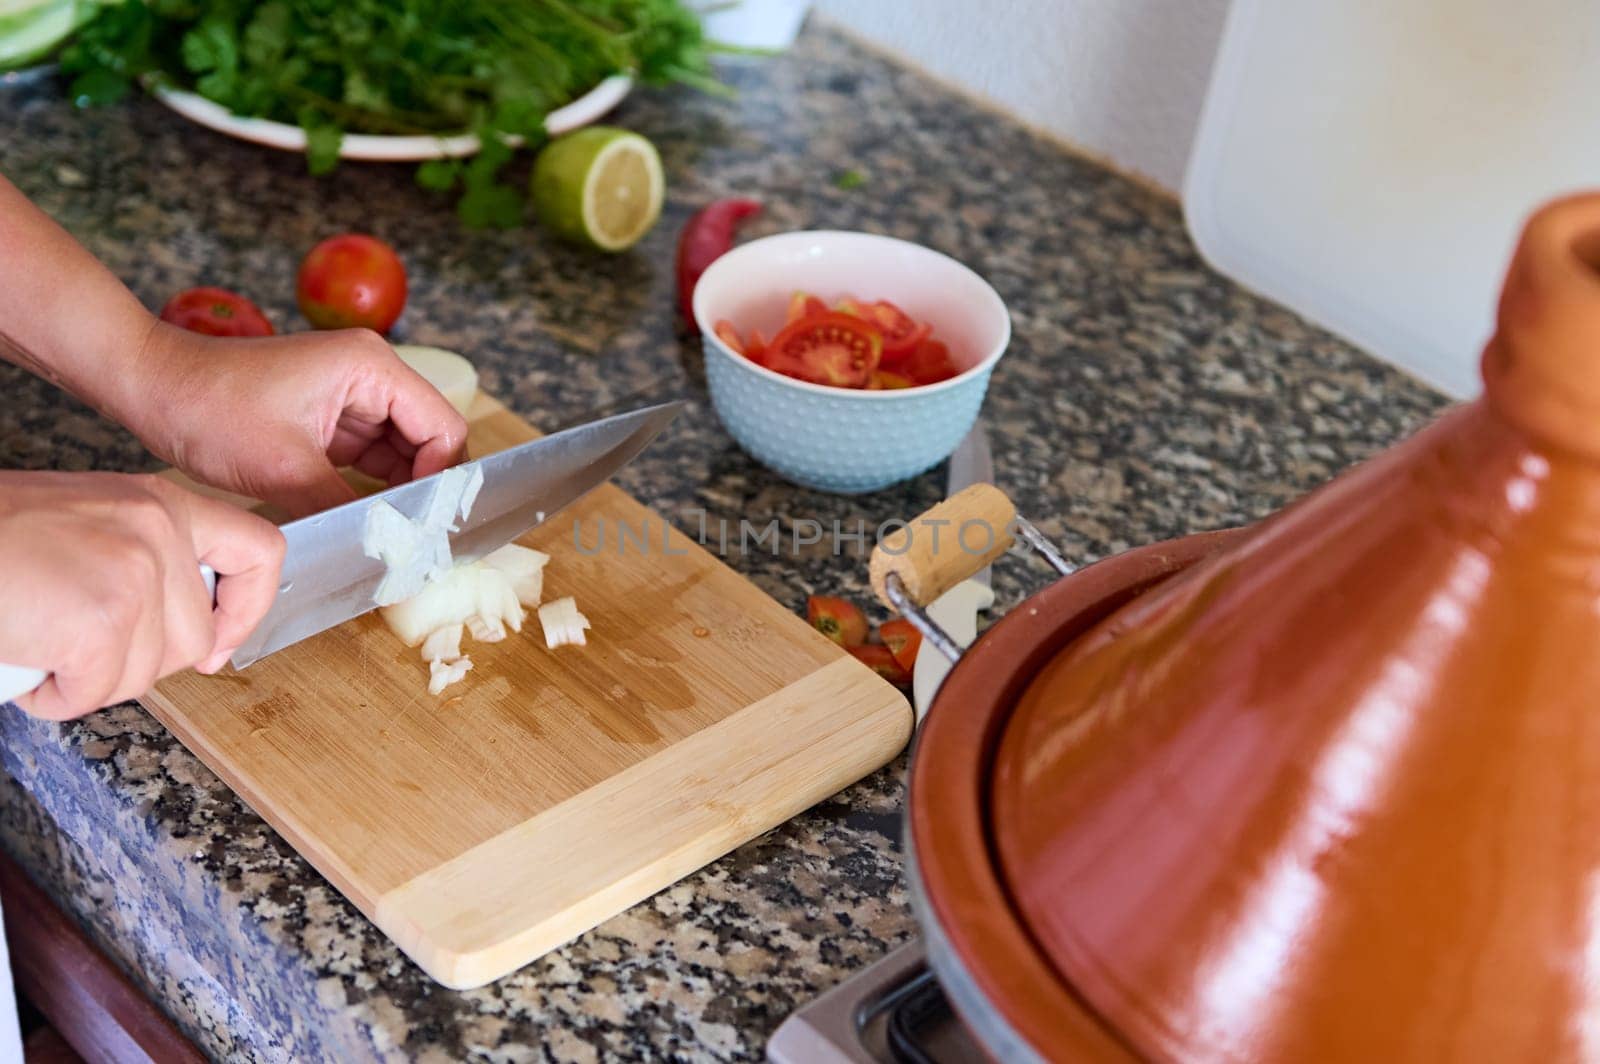 View form above. Close-up housewife's hands using a kitchen knife, chopping onion on wooden cutting board, preparing salad for dinner at home. Healthy eating concept. Food background. Culinary